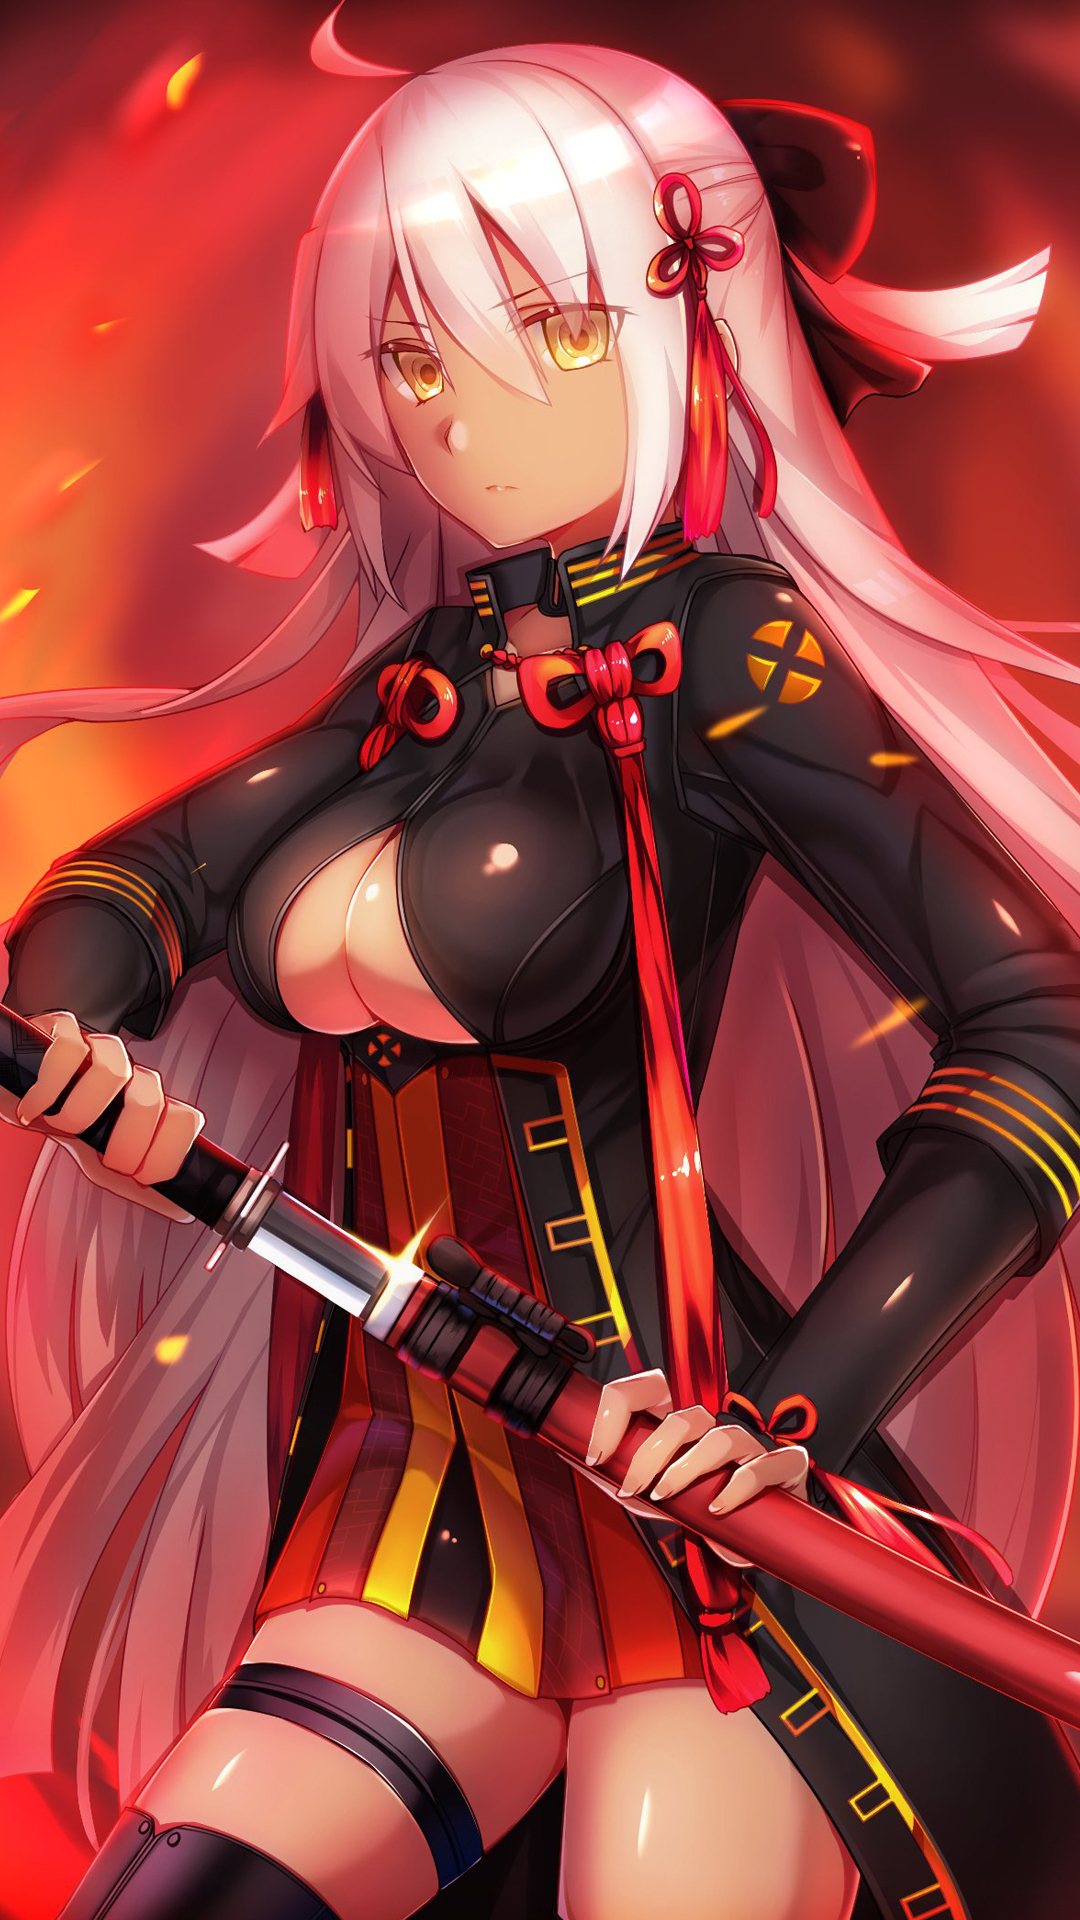 Fate Stay Night Fate Grand Order 魔神セイバー Iphone8 Plus 1080 X 19 壁紙 Wallpaperboys Com